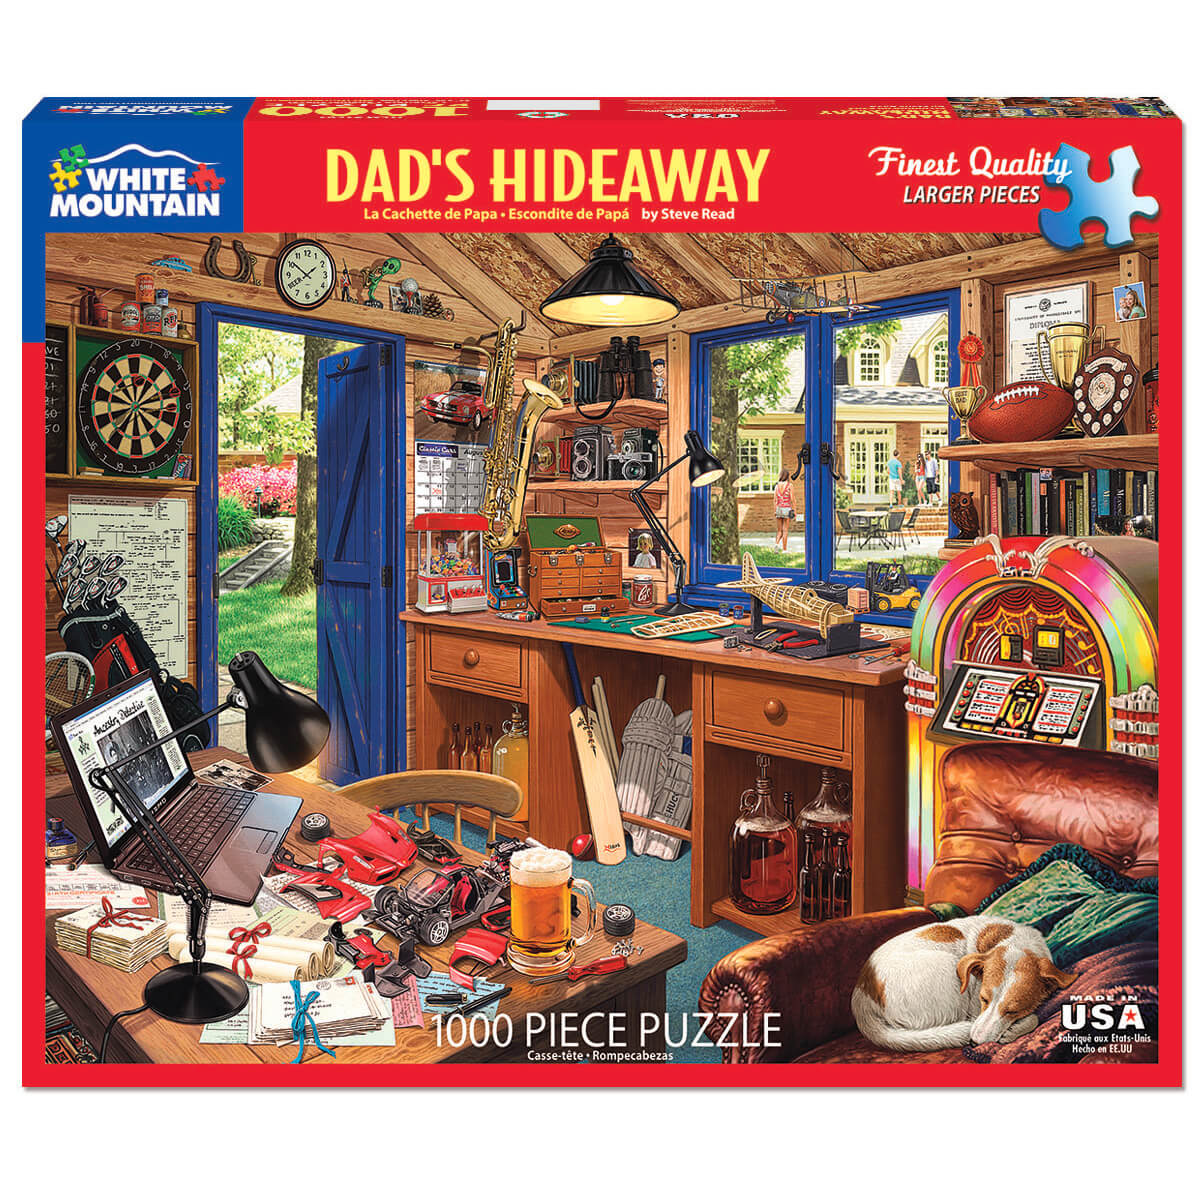 White Mountain Puzzles Dad’s Hideaway 1000 Piece Jigsaw Puzzle